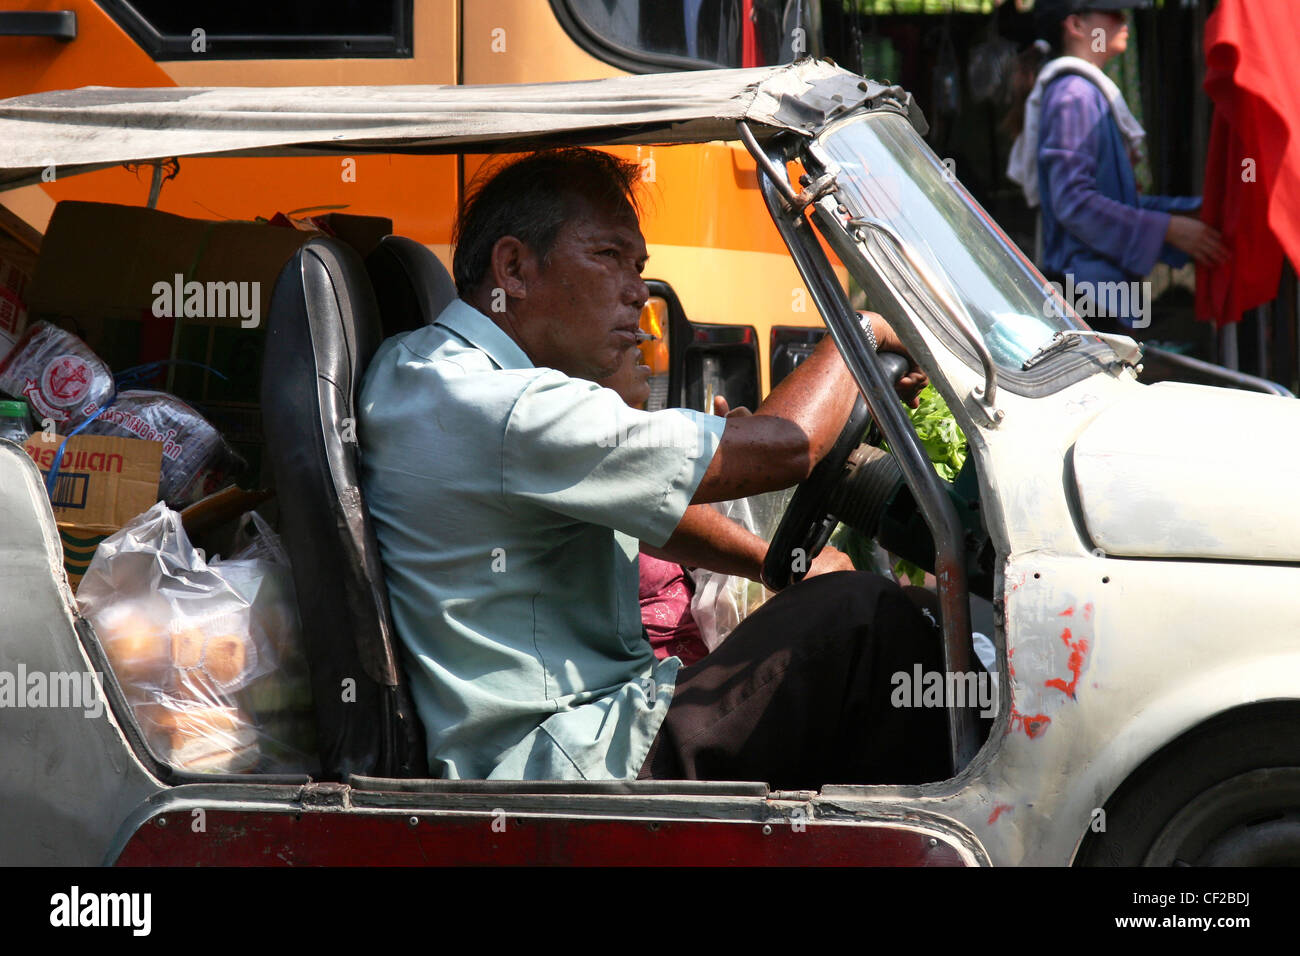 A man is driving a fully loaded old jalopy (car) on a city street in Bangkok, Thailand. Stock Photo